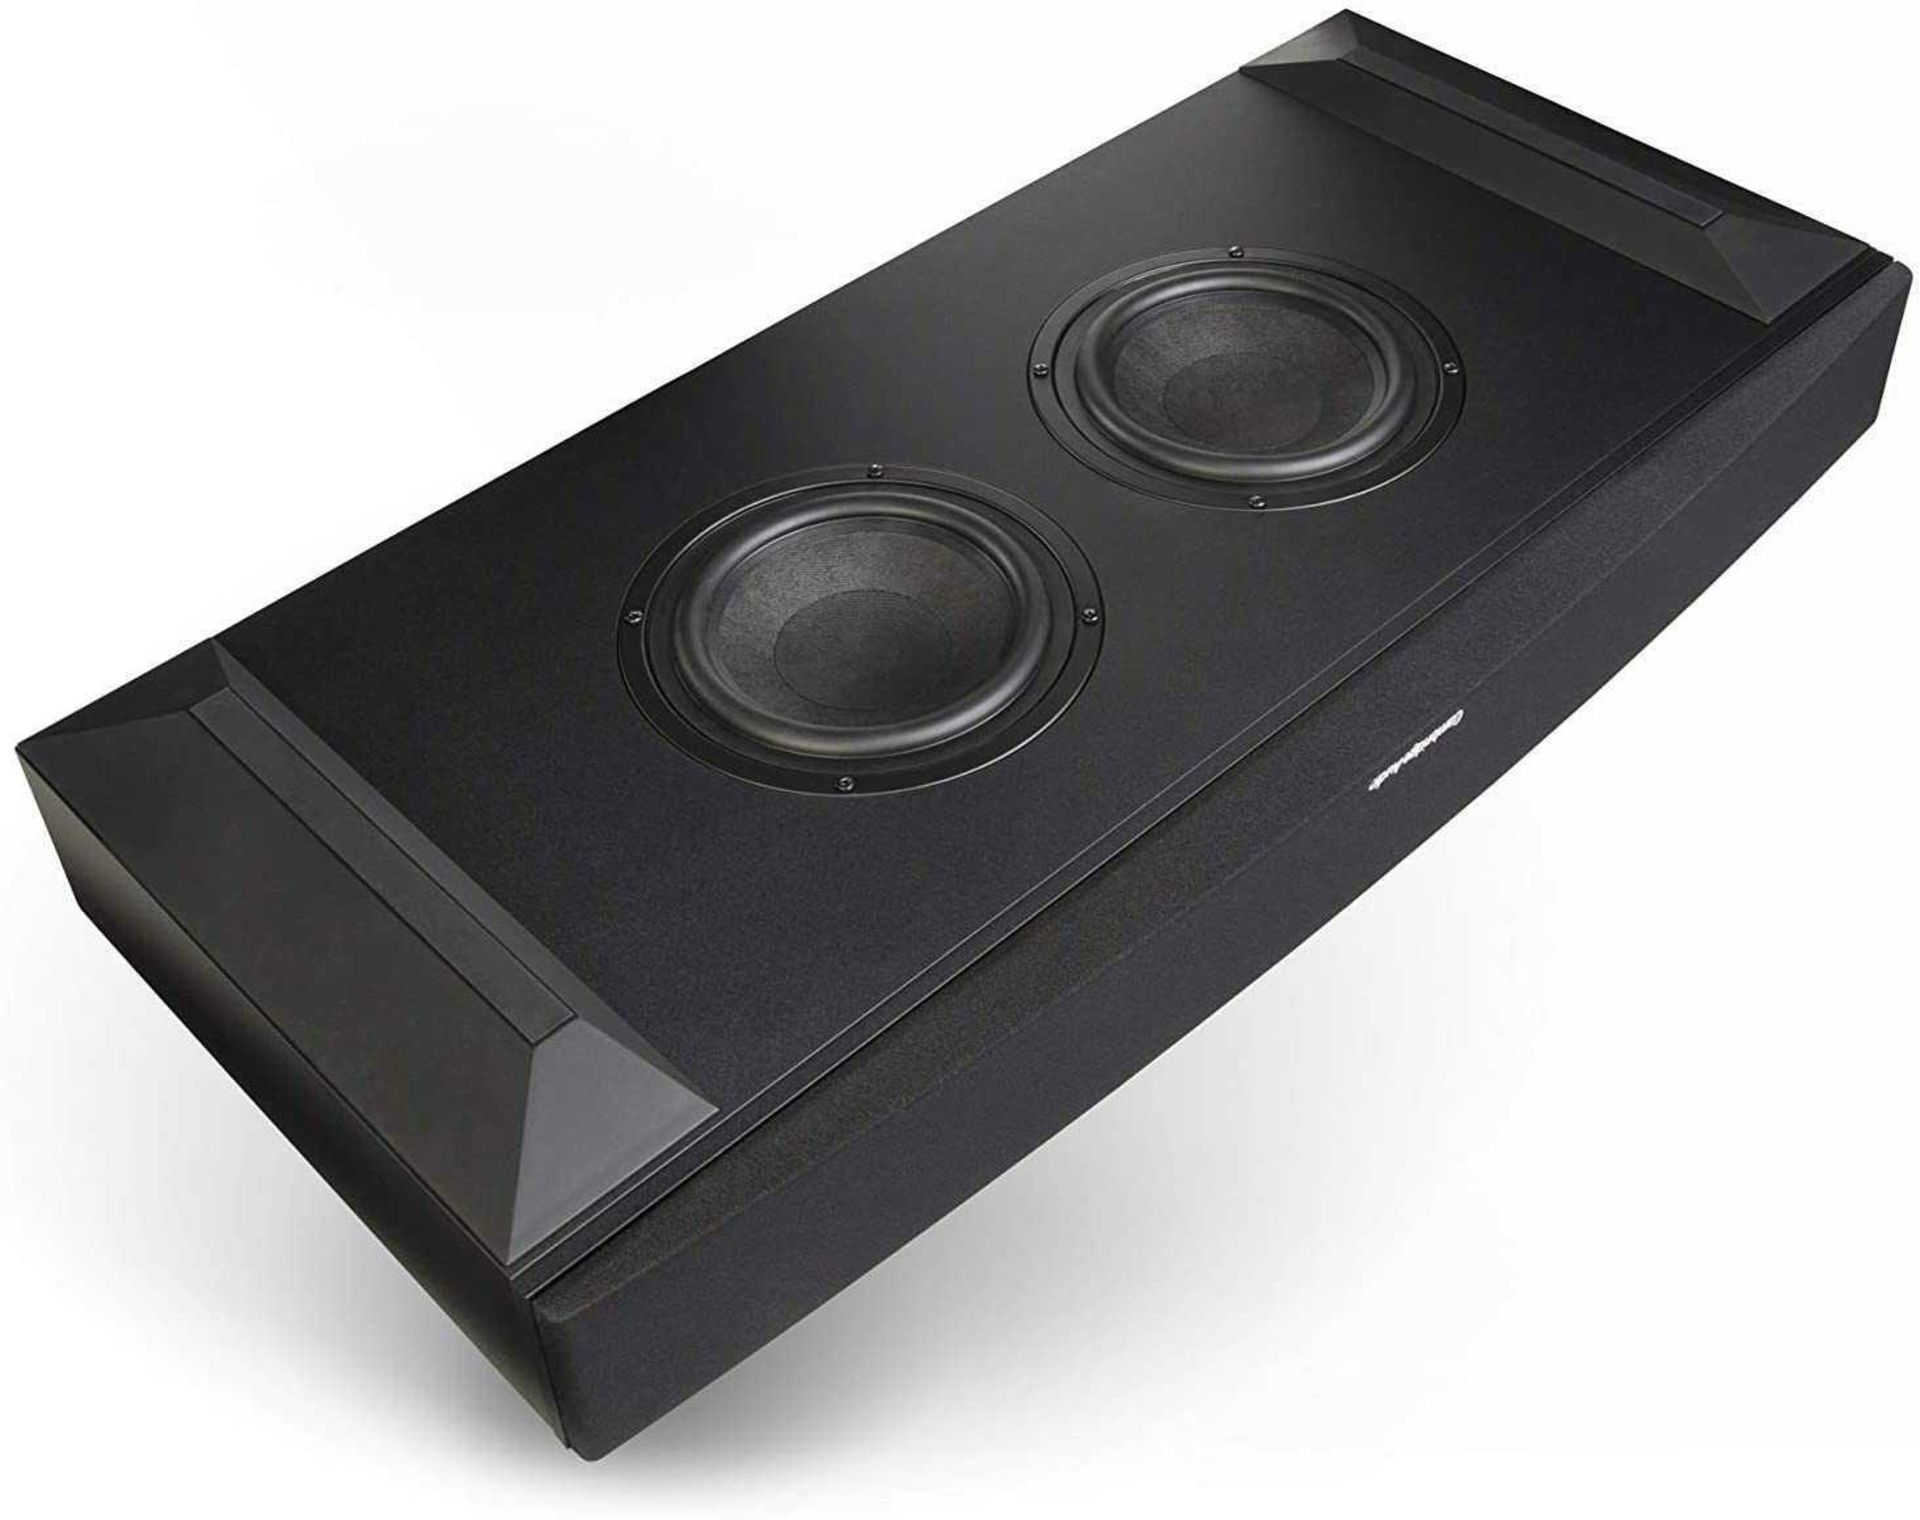 Rrp £250 Boxed Cambridge Audio Tv5 V2 Tv Speaker Base With Bluetooth (Tested & Working)